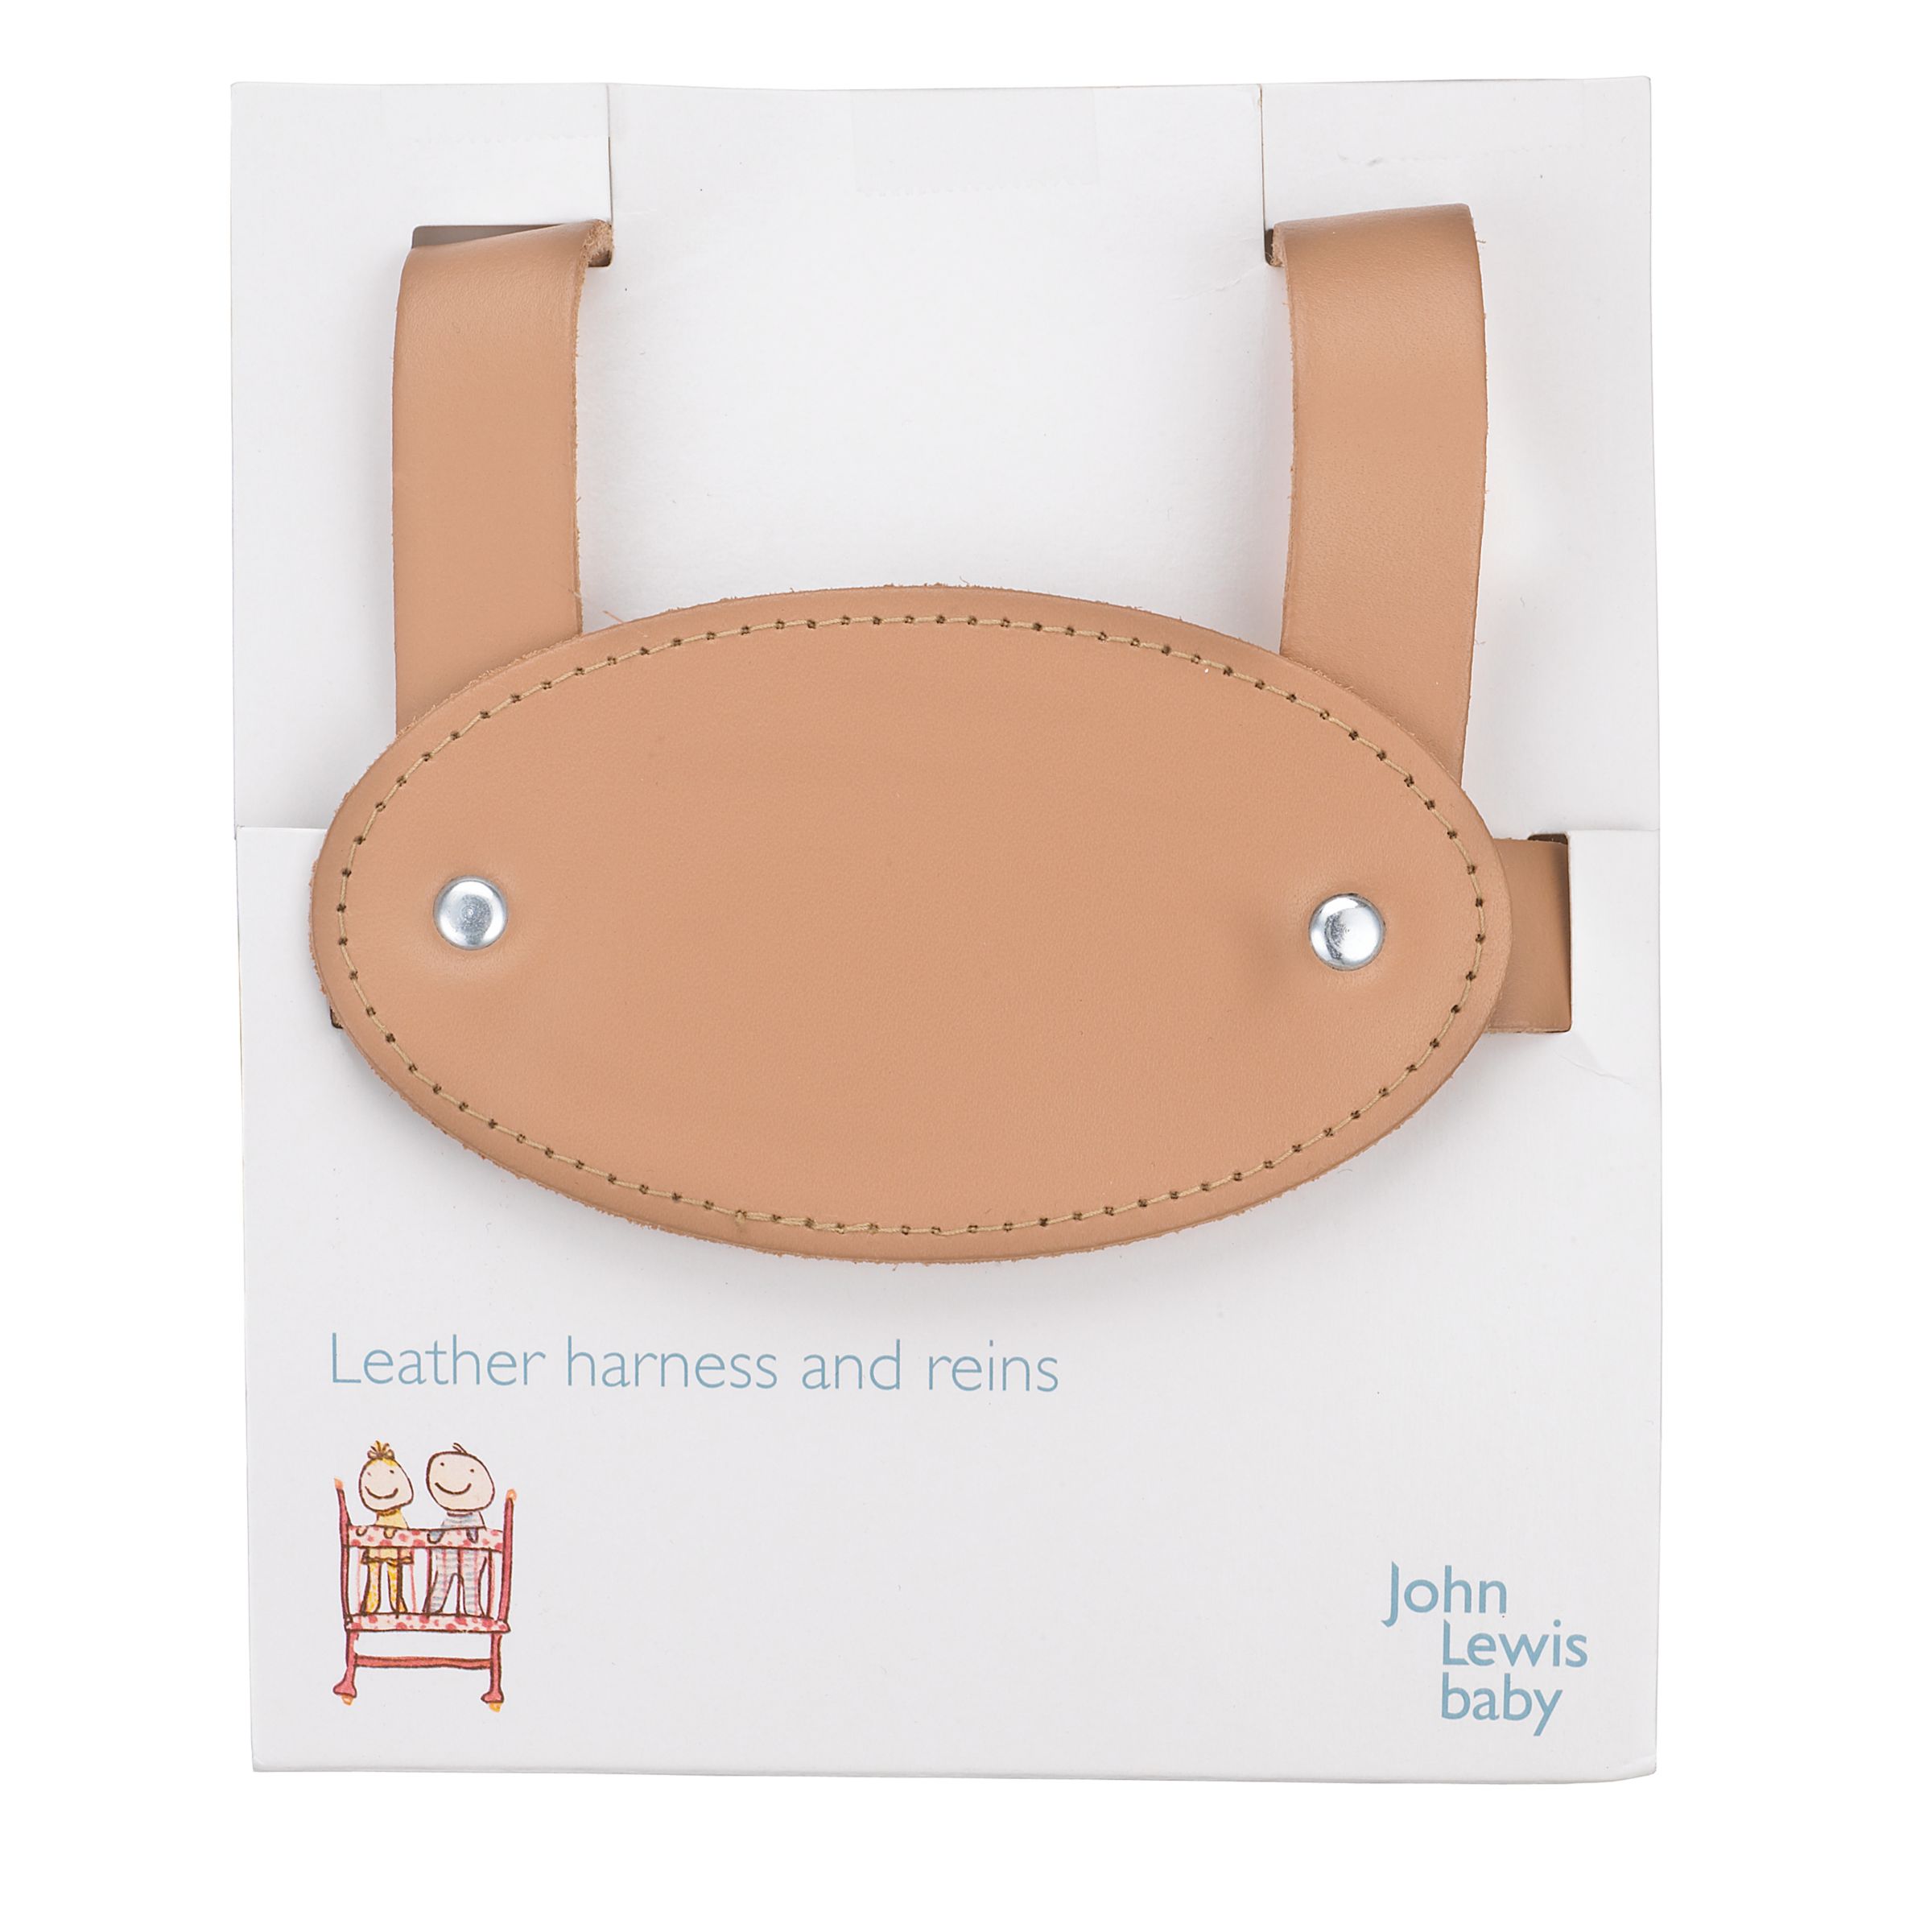 John Lewis Baby Leather Harness and Reins, Tan